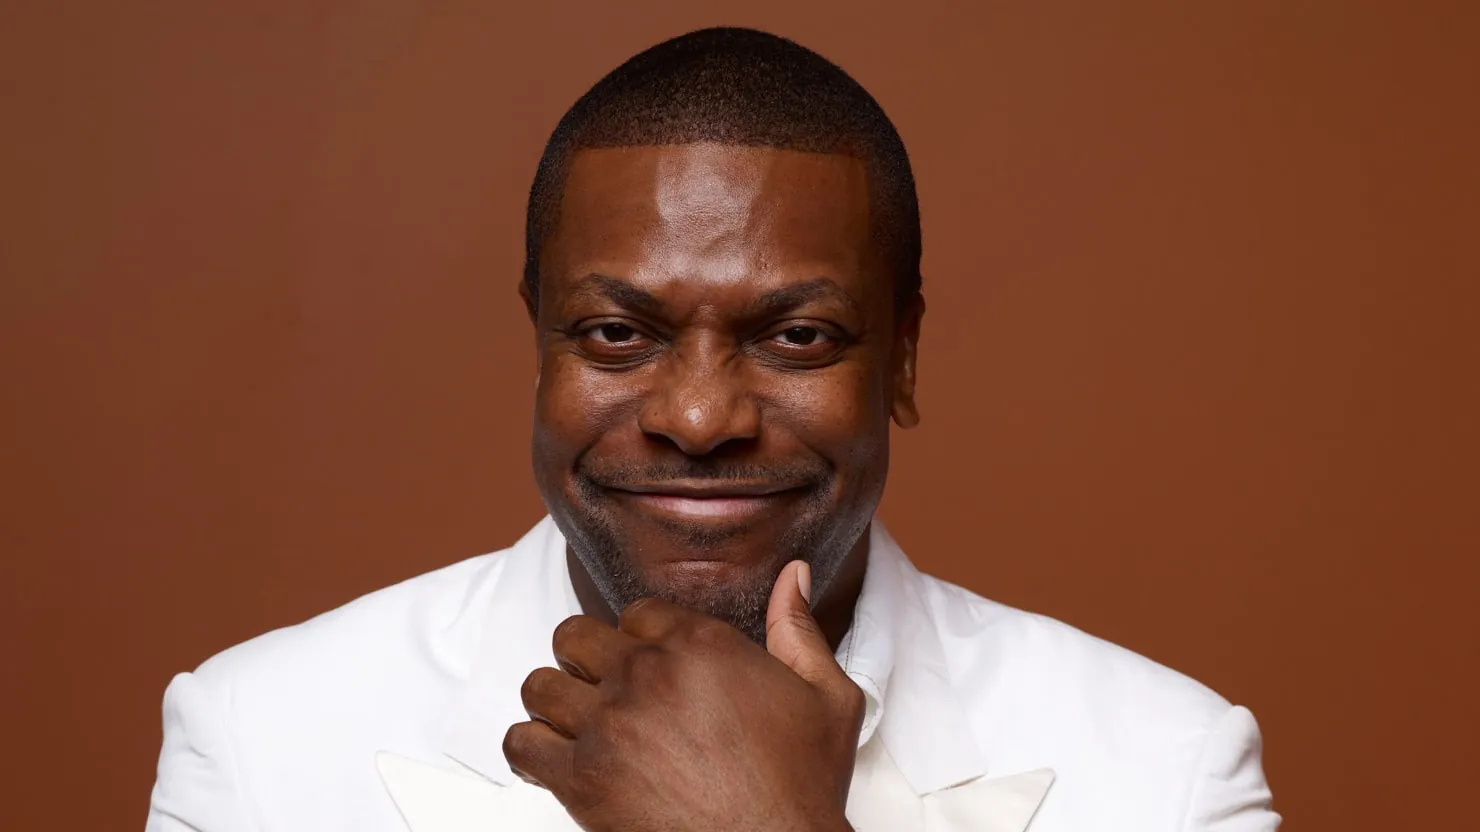 Chris Tucker Death Hoax Dismissed Since Actor Is ‘Alive And Well’